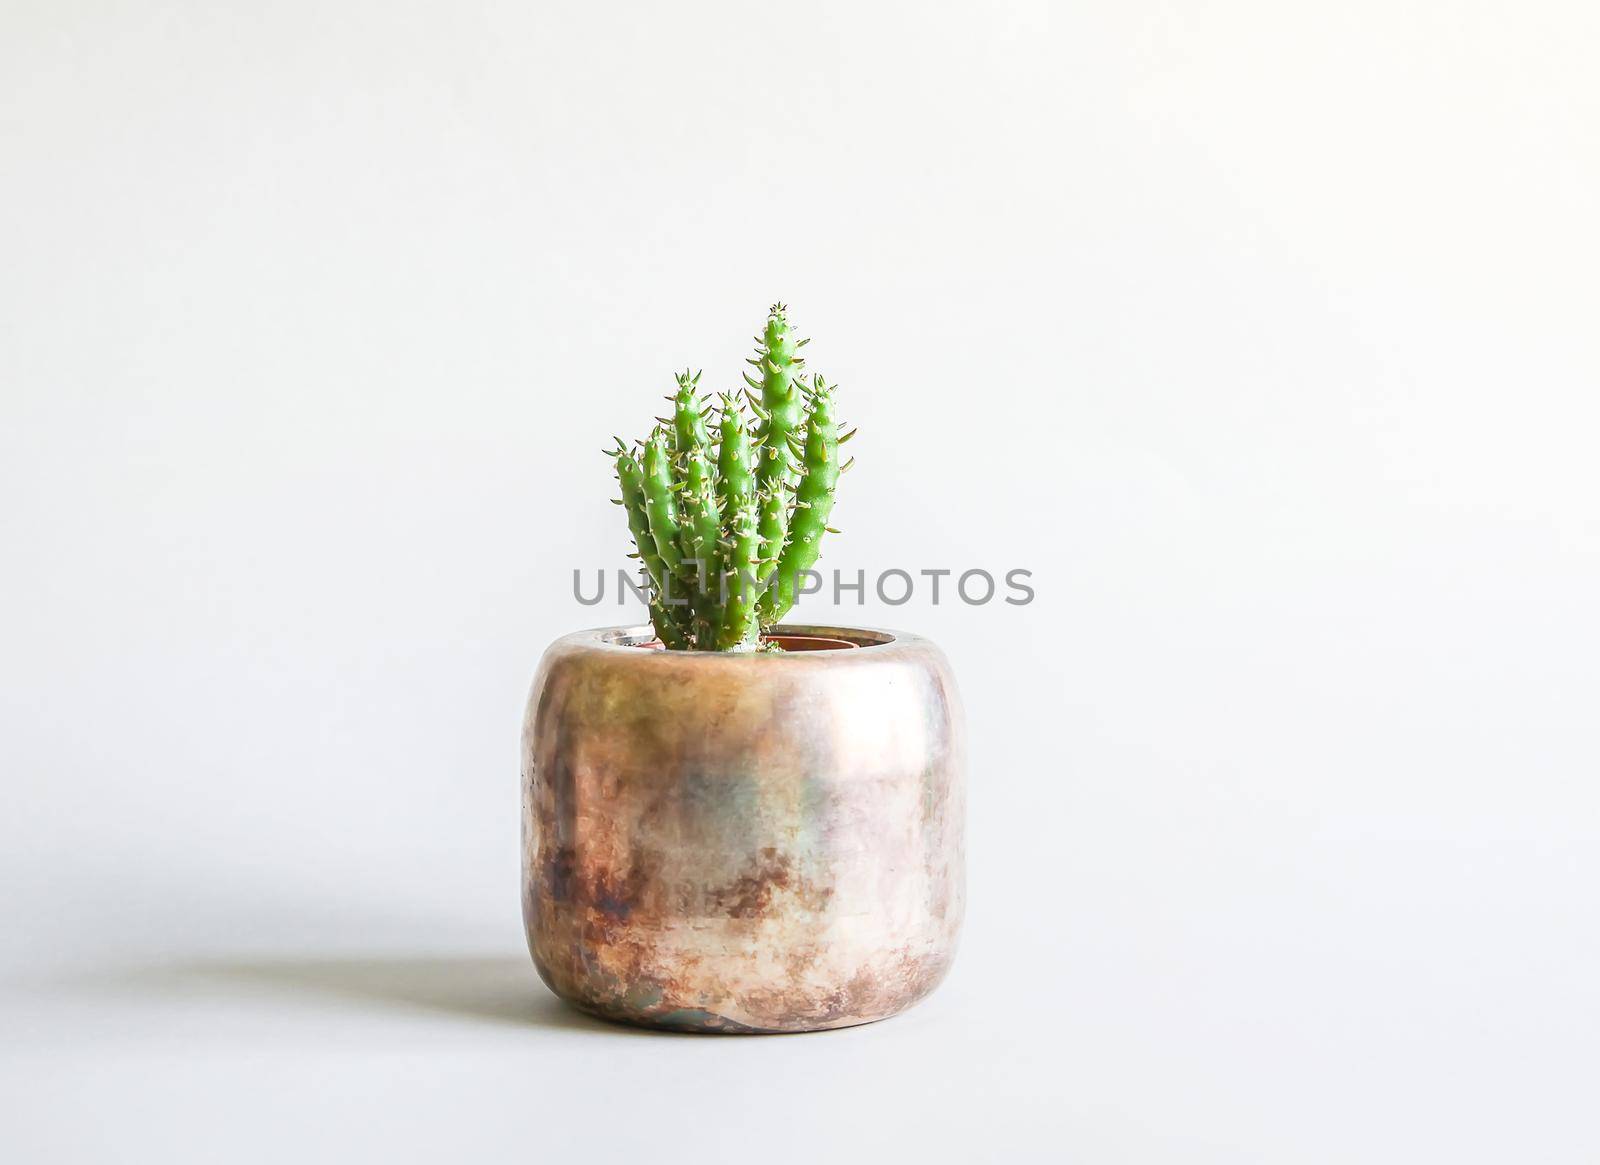 Cactus in the copper pot. Decorative plant in minimalistic modern room interior by nightlyviolet